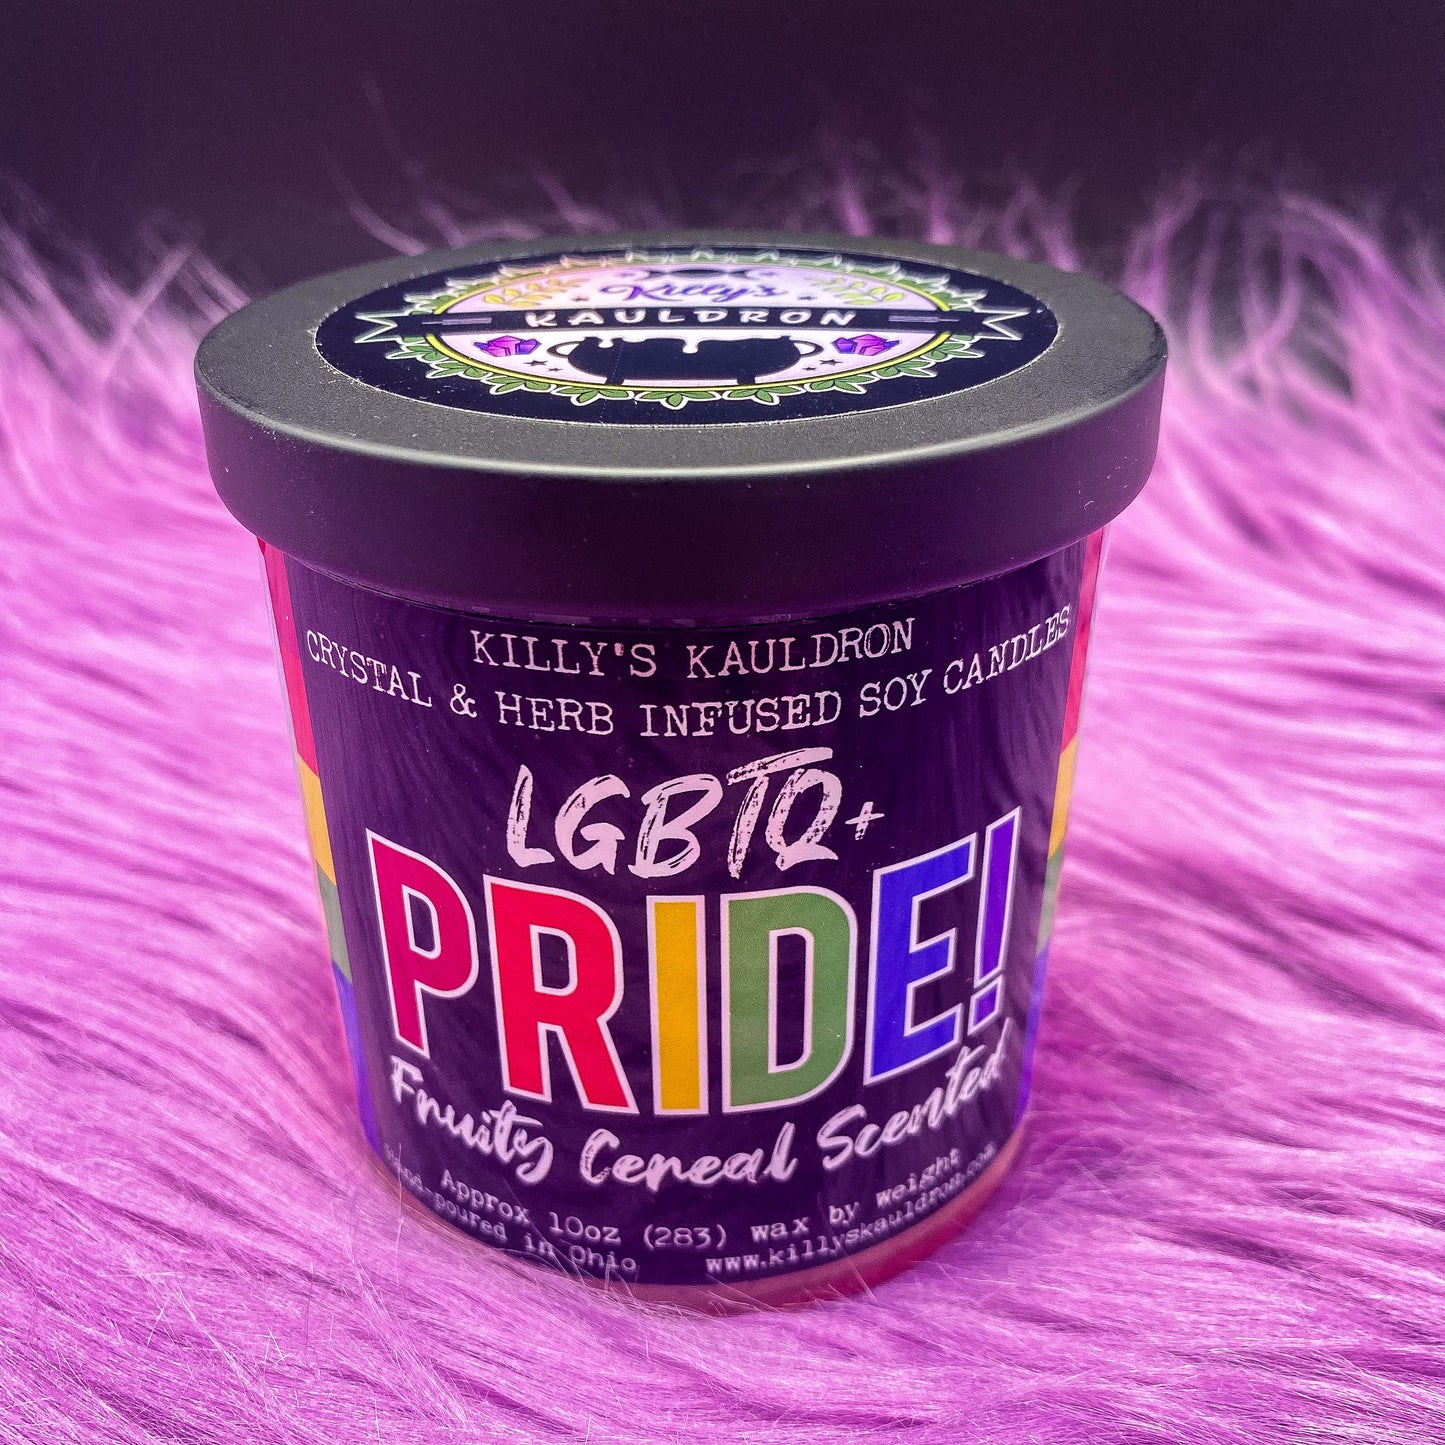 Pride Candles & Melts